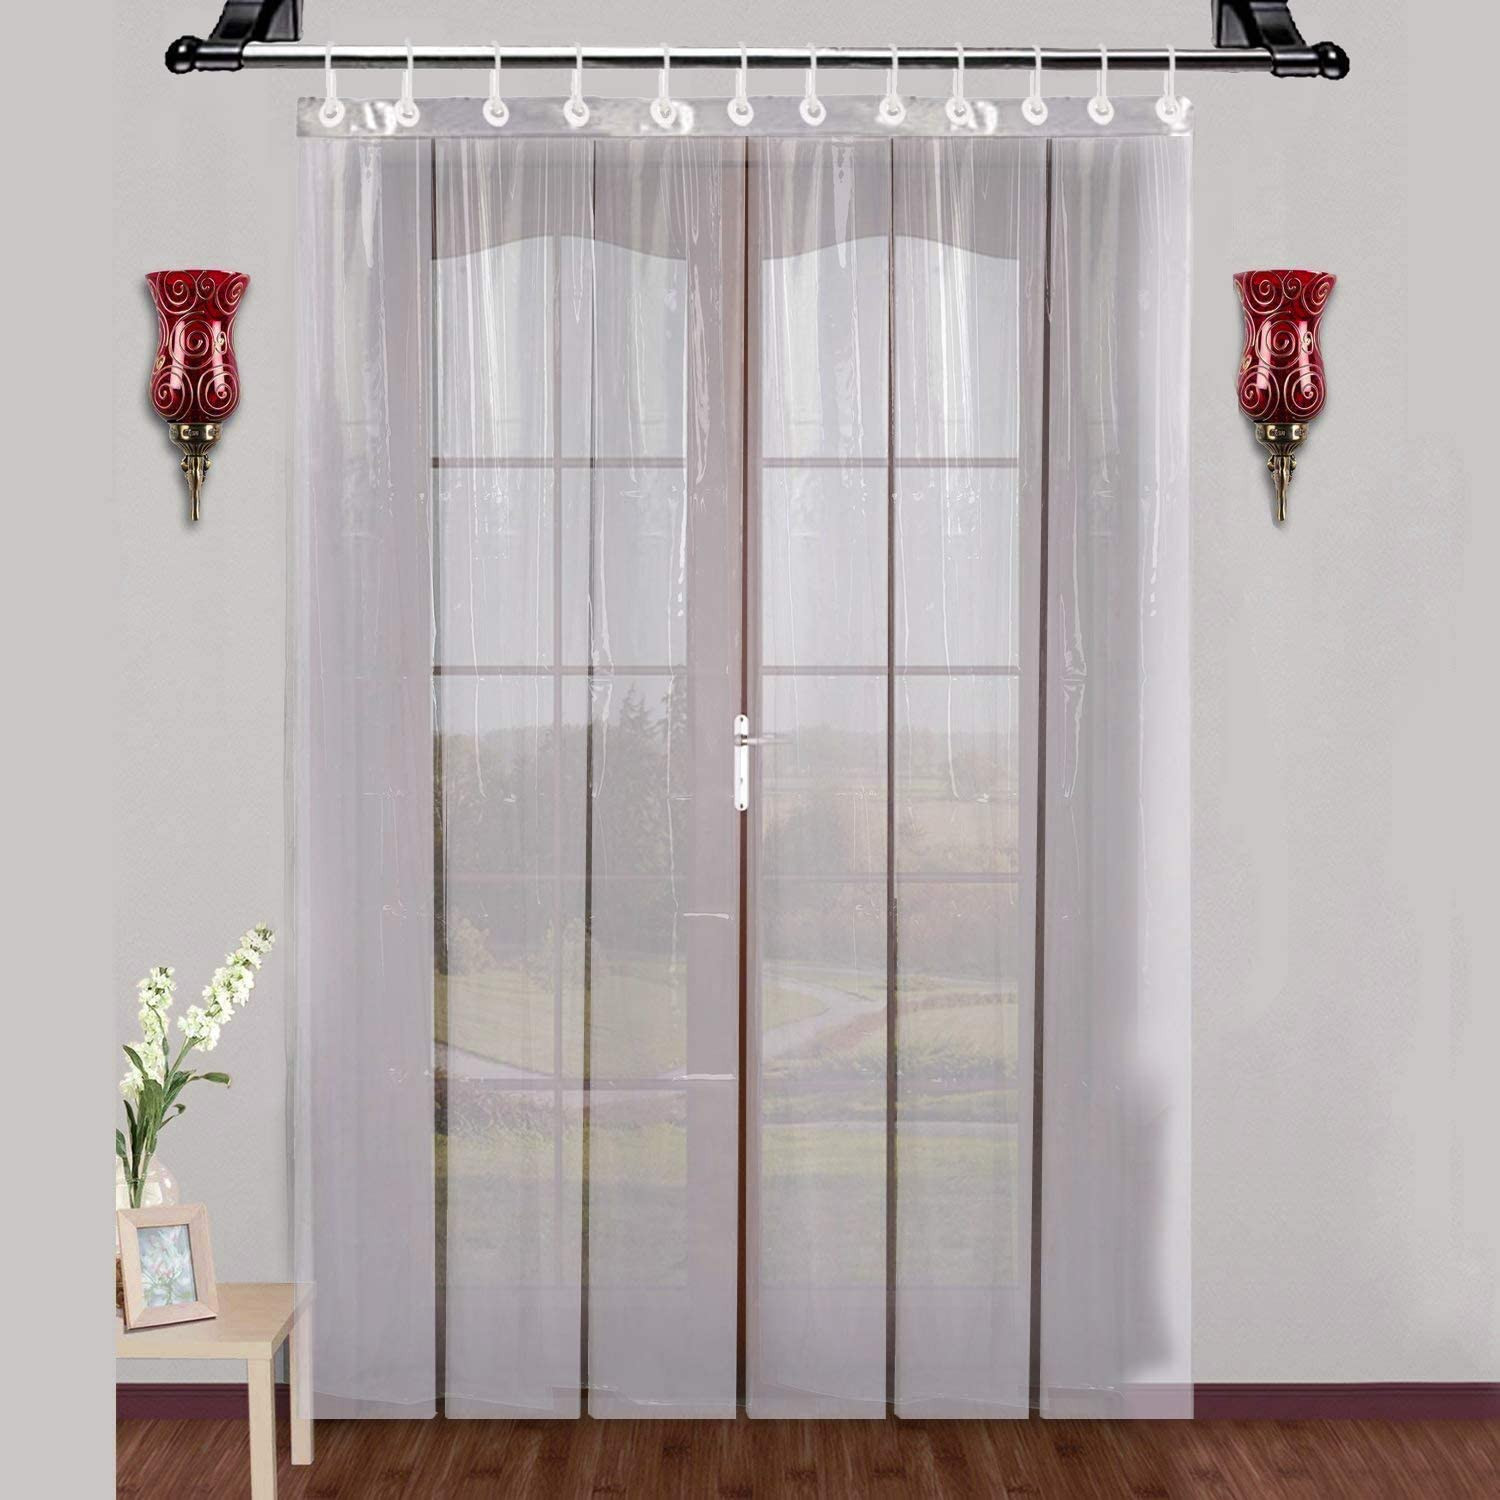 Kuber Industries 2MM Pack Of 1| Rings AC Curtain | PVC 6 Strips AC Curtain | Window Curtain for Bathroom | Curtains for Door | Waterproof Shower Curtain | 9 Feet| Transparent